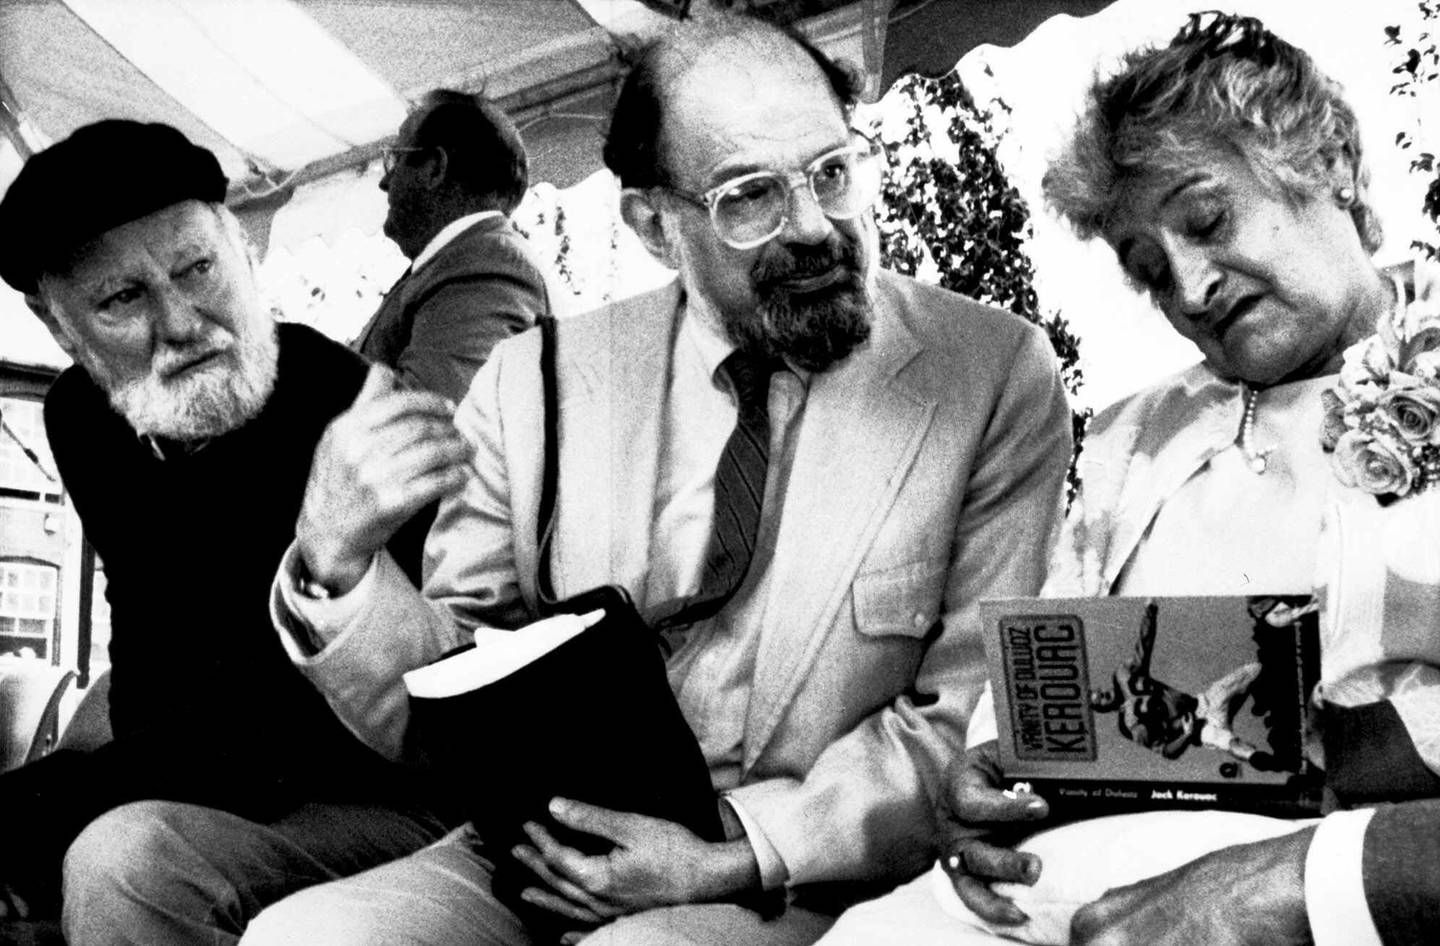 Poets Lawrence Ferlinghetti, left, and Allen Ginsberg, center, look on with Stella Kerouac, right, in this June 25, 1988 photo. Kerouac autographs one of her late husband's books, during the dedication of the Jack Kerouac Commerative, a work of public art, in Lowell, Massachusetts' historic district.        (AP Photo)